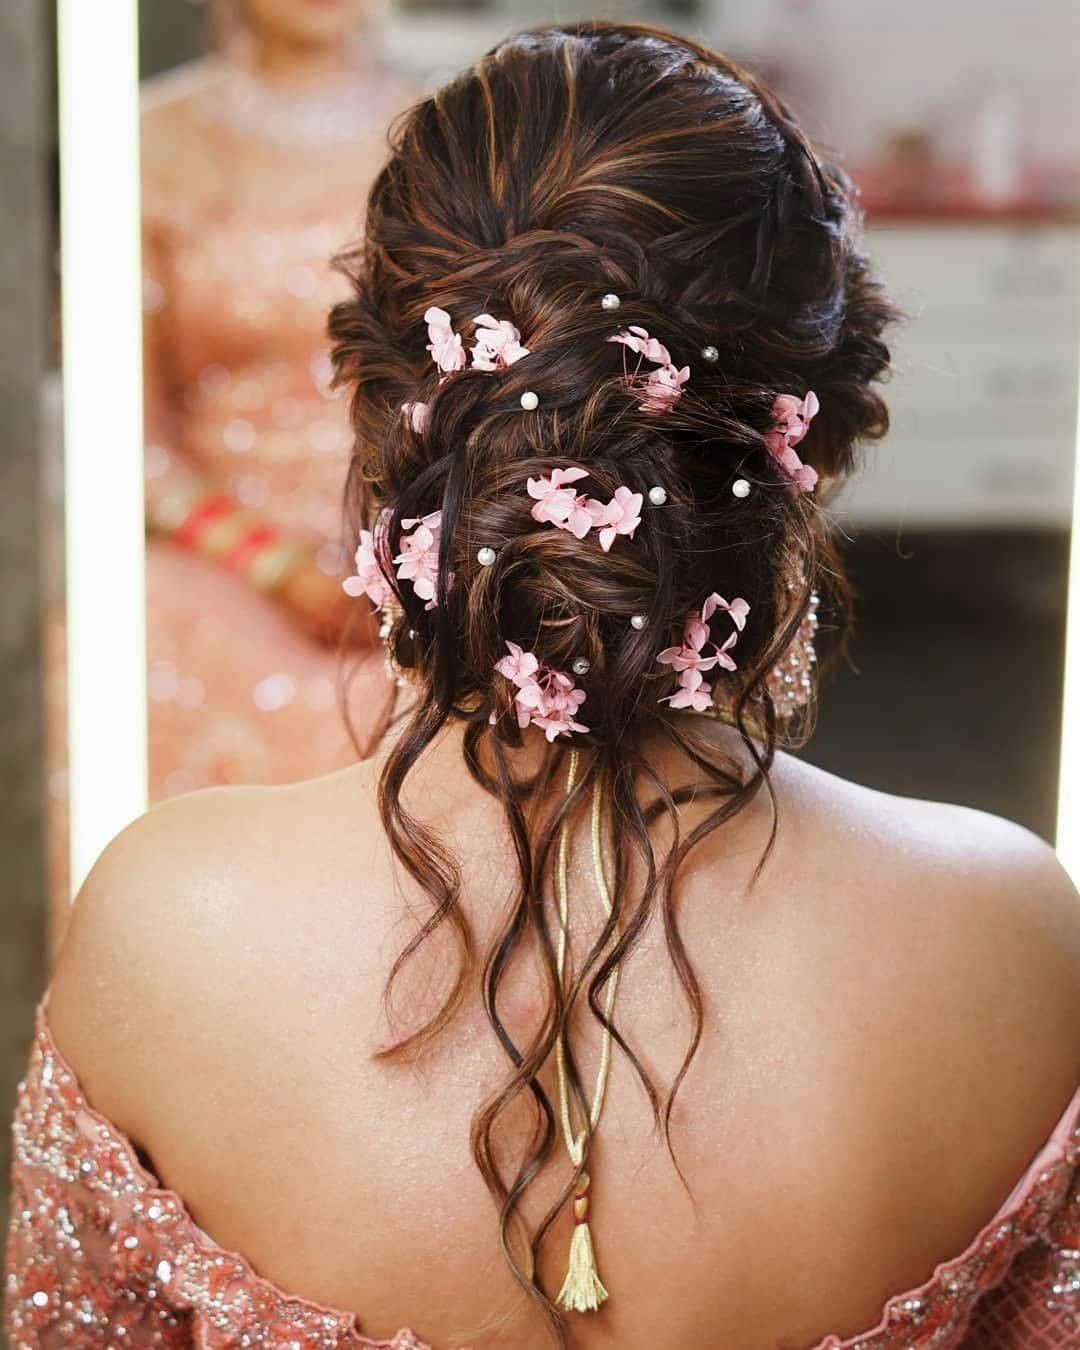 20 Best and Beautiful Indian Bridal Hairstyles for Engagement  Wedding